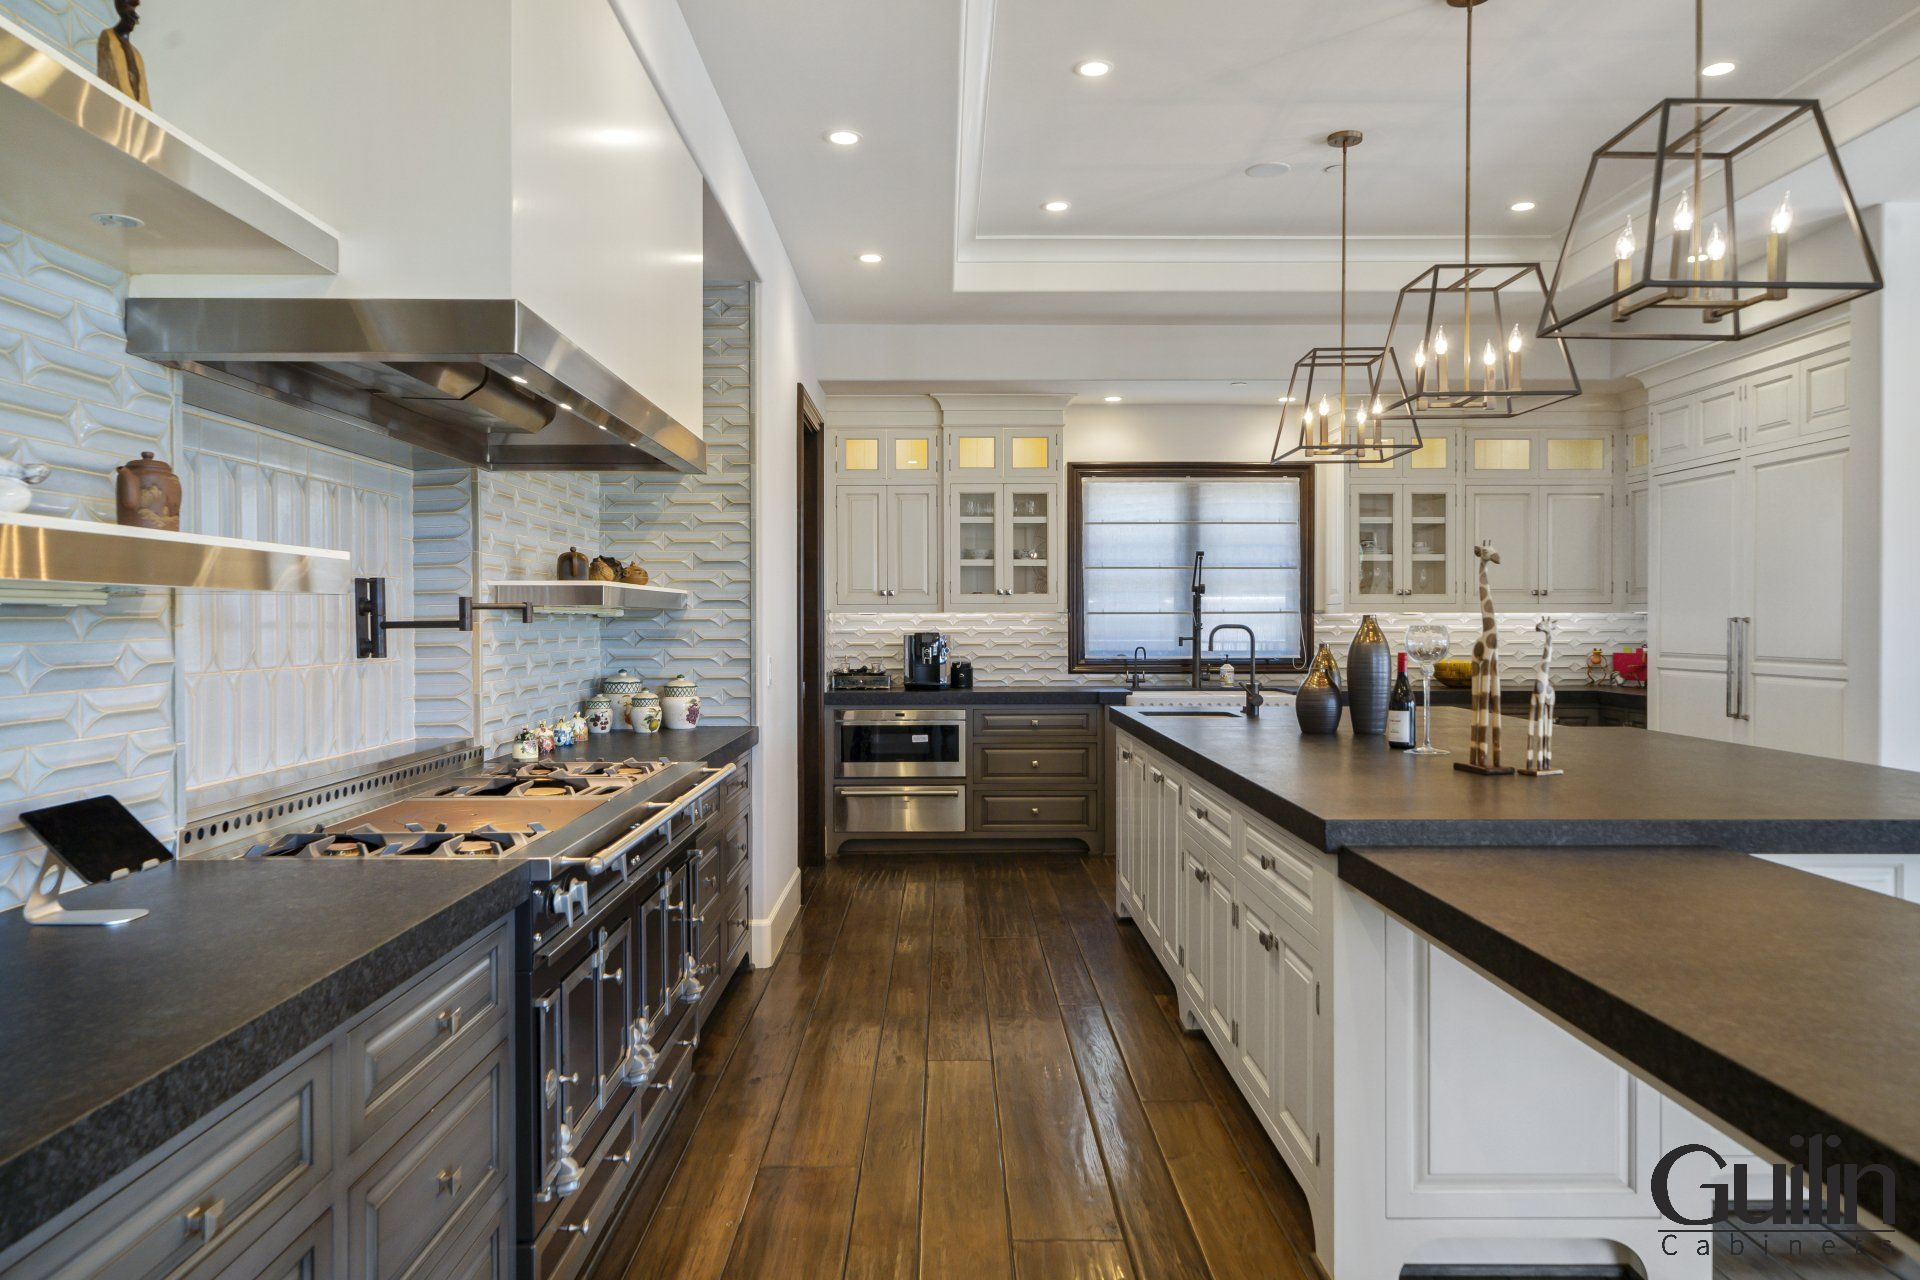 Traditional kitchens is usually use a variety of materials and textures, such as wood, stone, granite, marble, ceramic, and glass... The mixture of different materials and textures gives traditional kitchens a unique, luxurious feel.